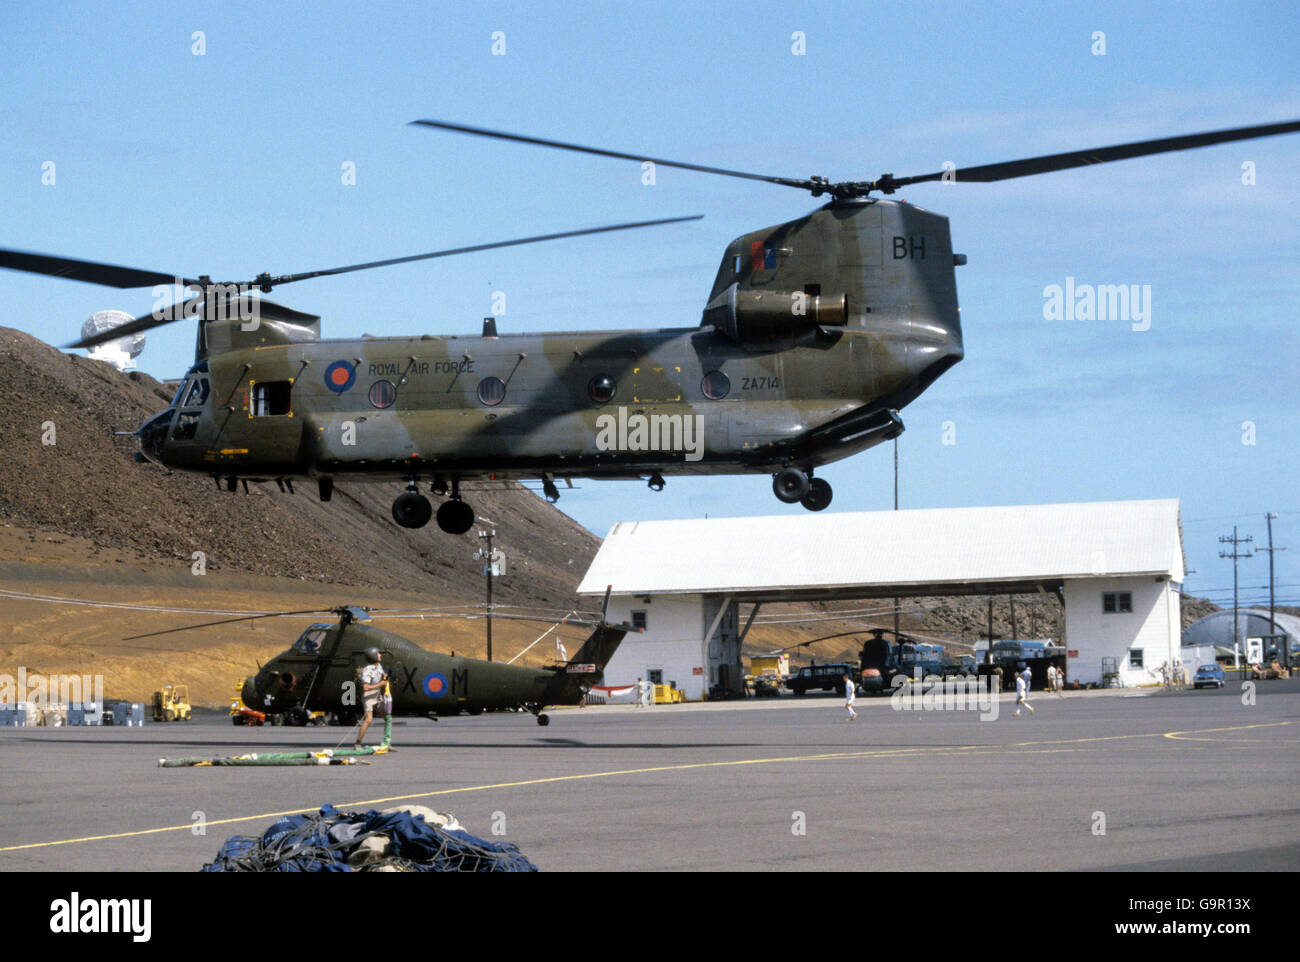 A Chinook helicopter in operation over the runway on Ascension Island, the volcanic landmark in the Atlantic which has proved a vital staging post for the British task force in the Falklands. Stock Photo